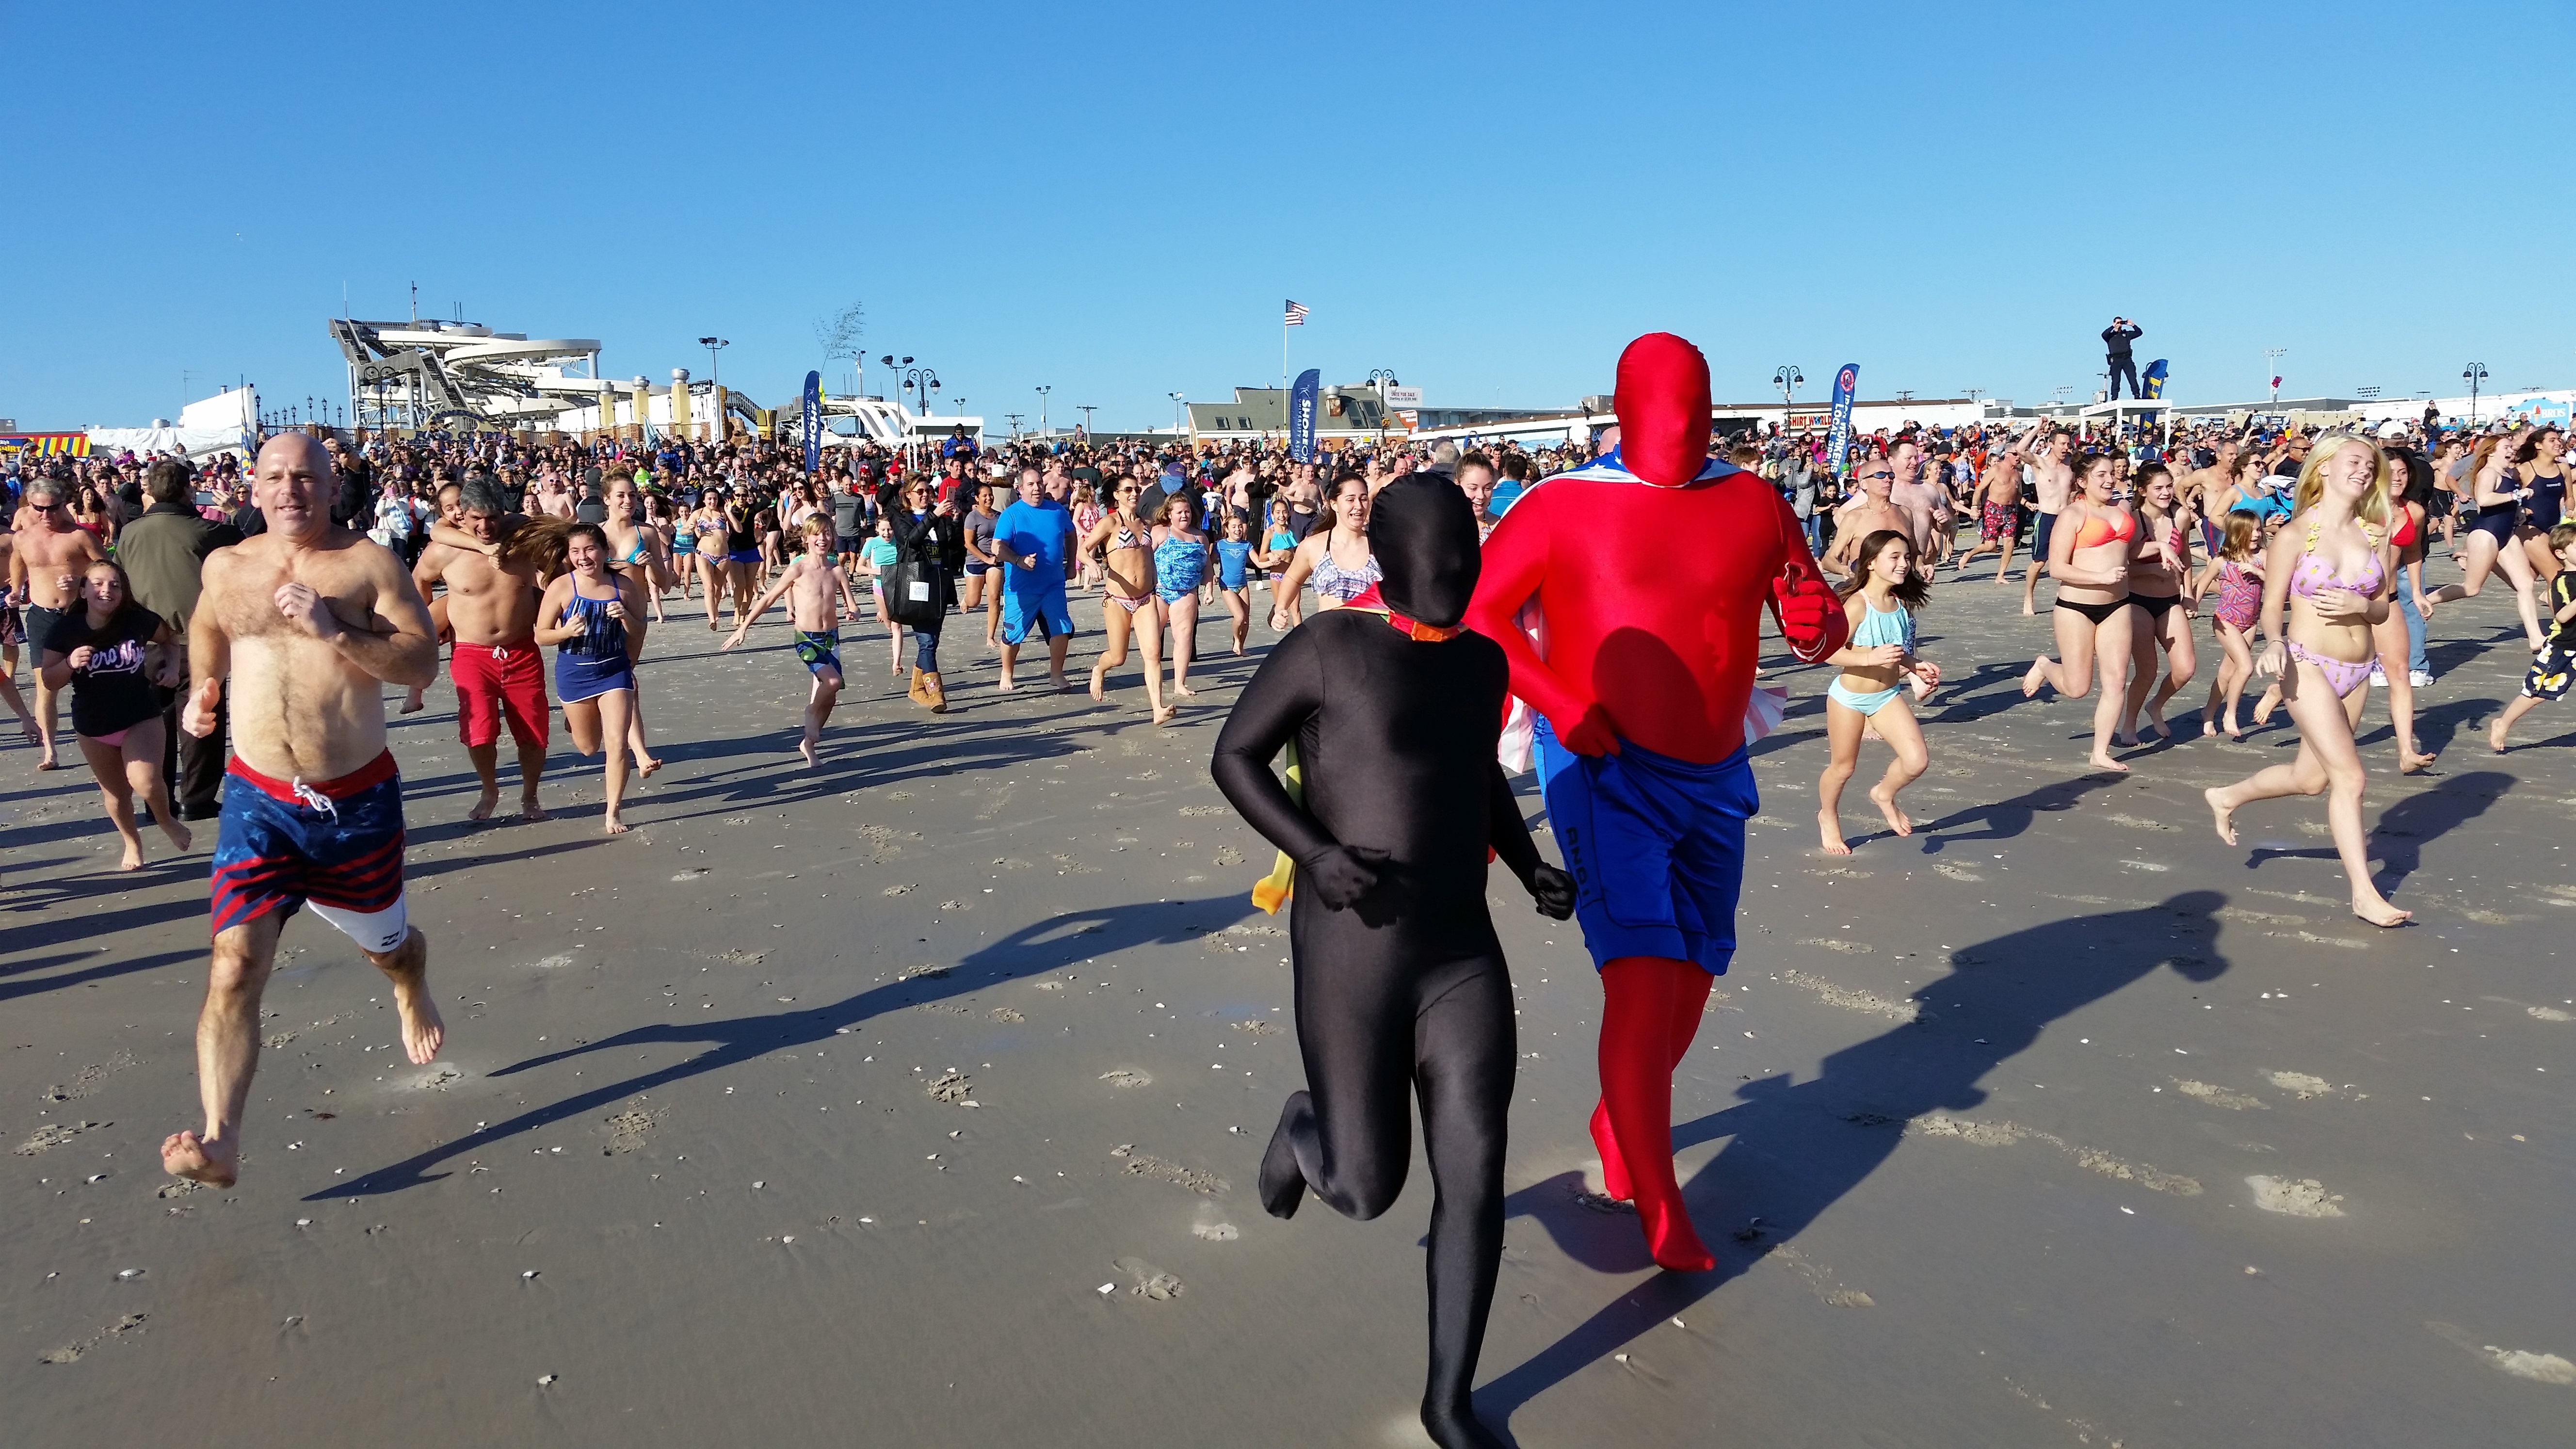 Clad in his red and blue superhero costume, veteran First Dip plunger Brian Green, of Ocean City, charges for the surf.